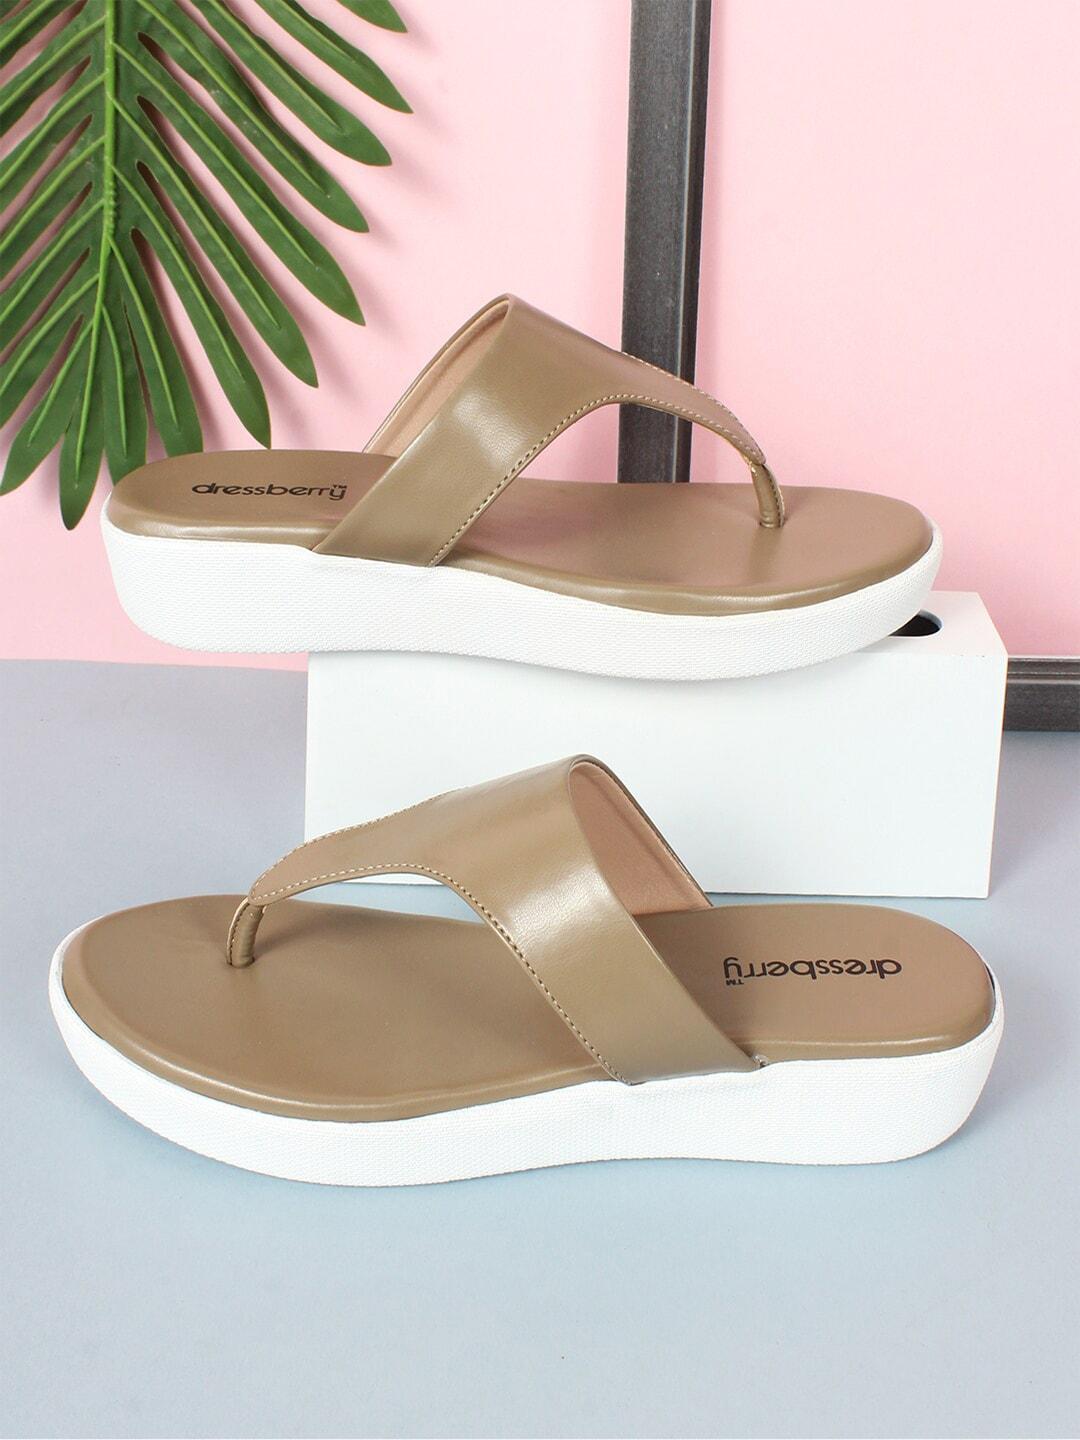 dressberry women taupe sandals